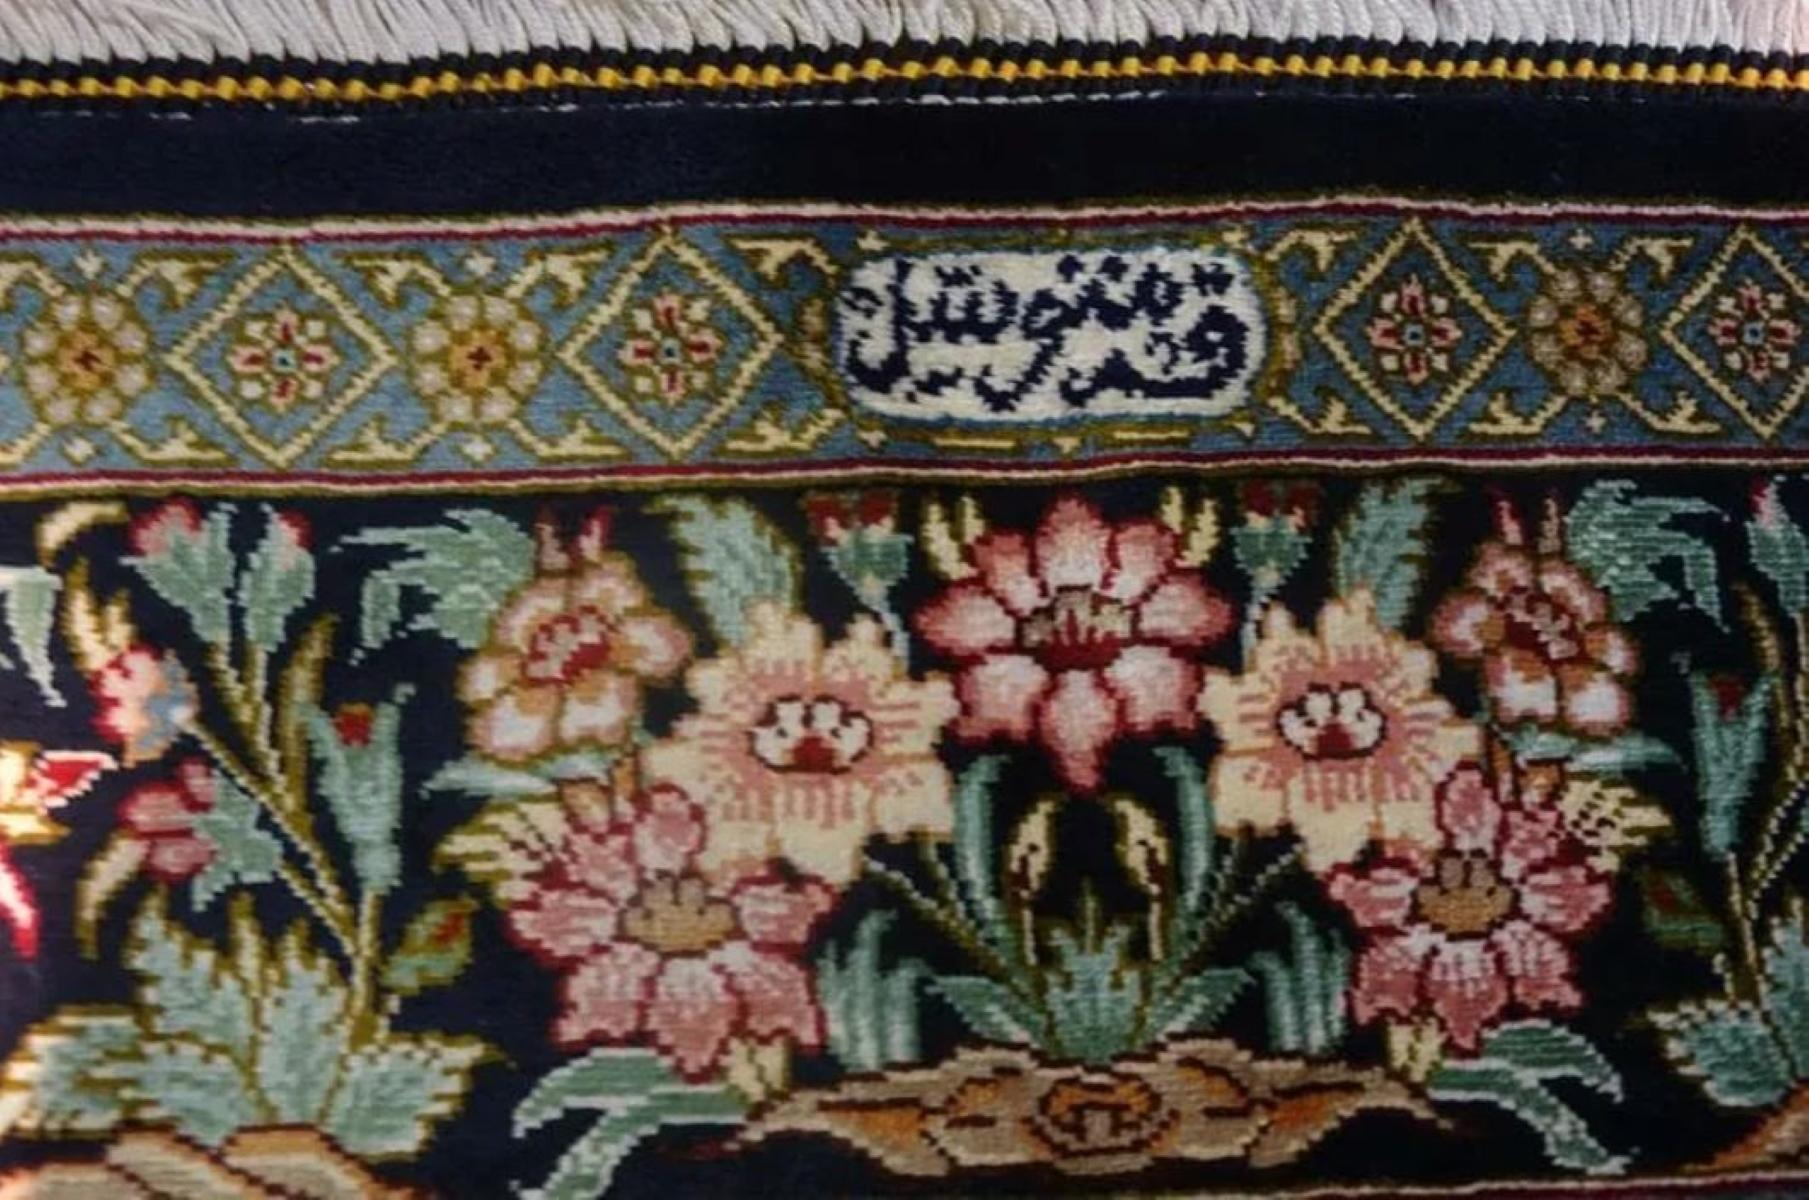 Very fine Persian Silk Qum - 5' x  3.3' In Excellent Condition For Sale In Newmanstown, PA